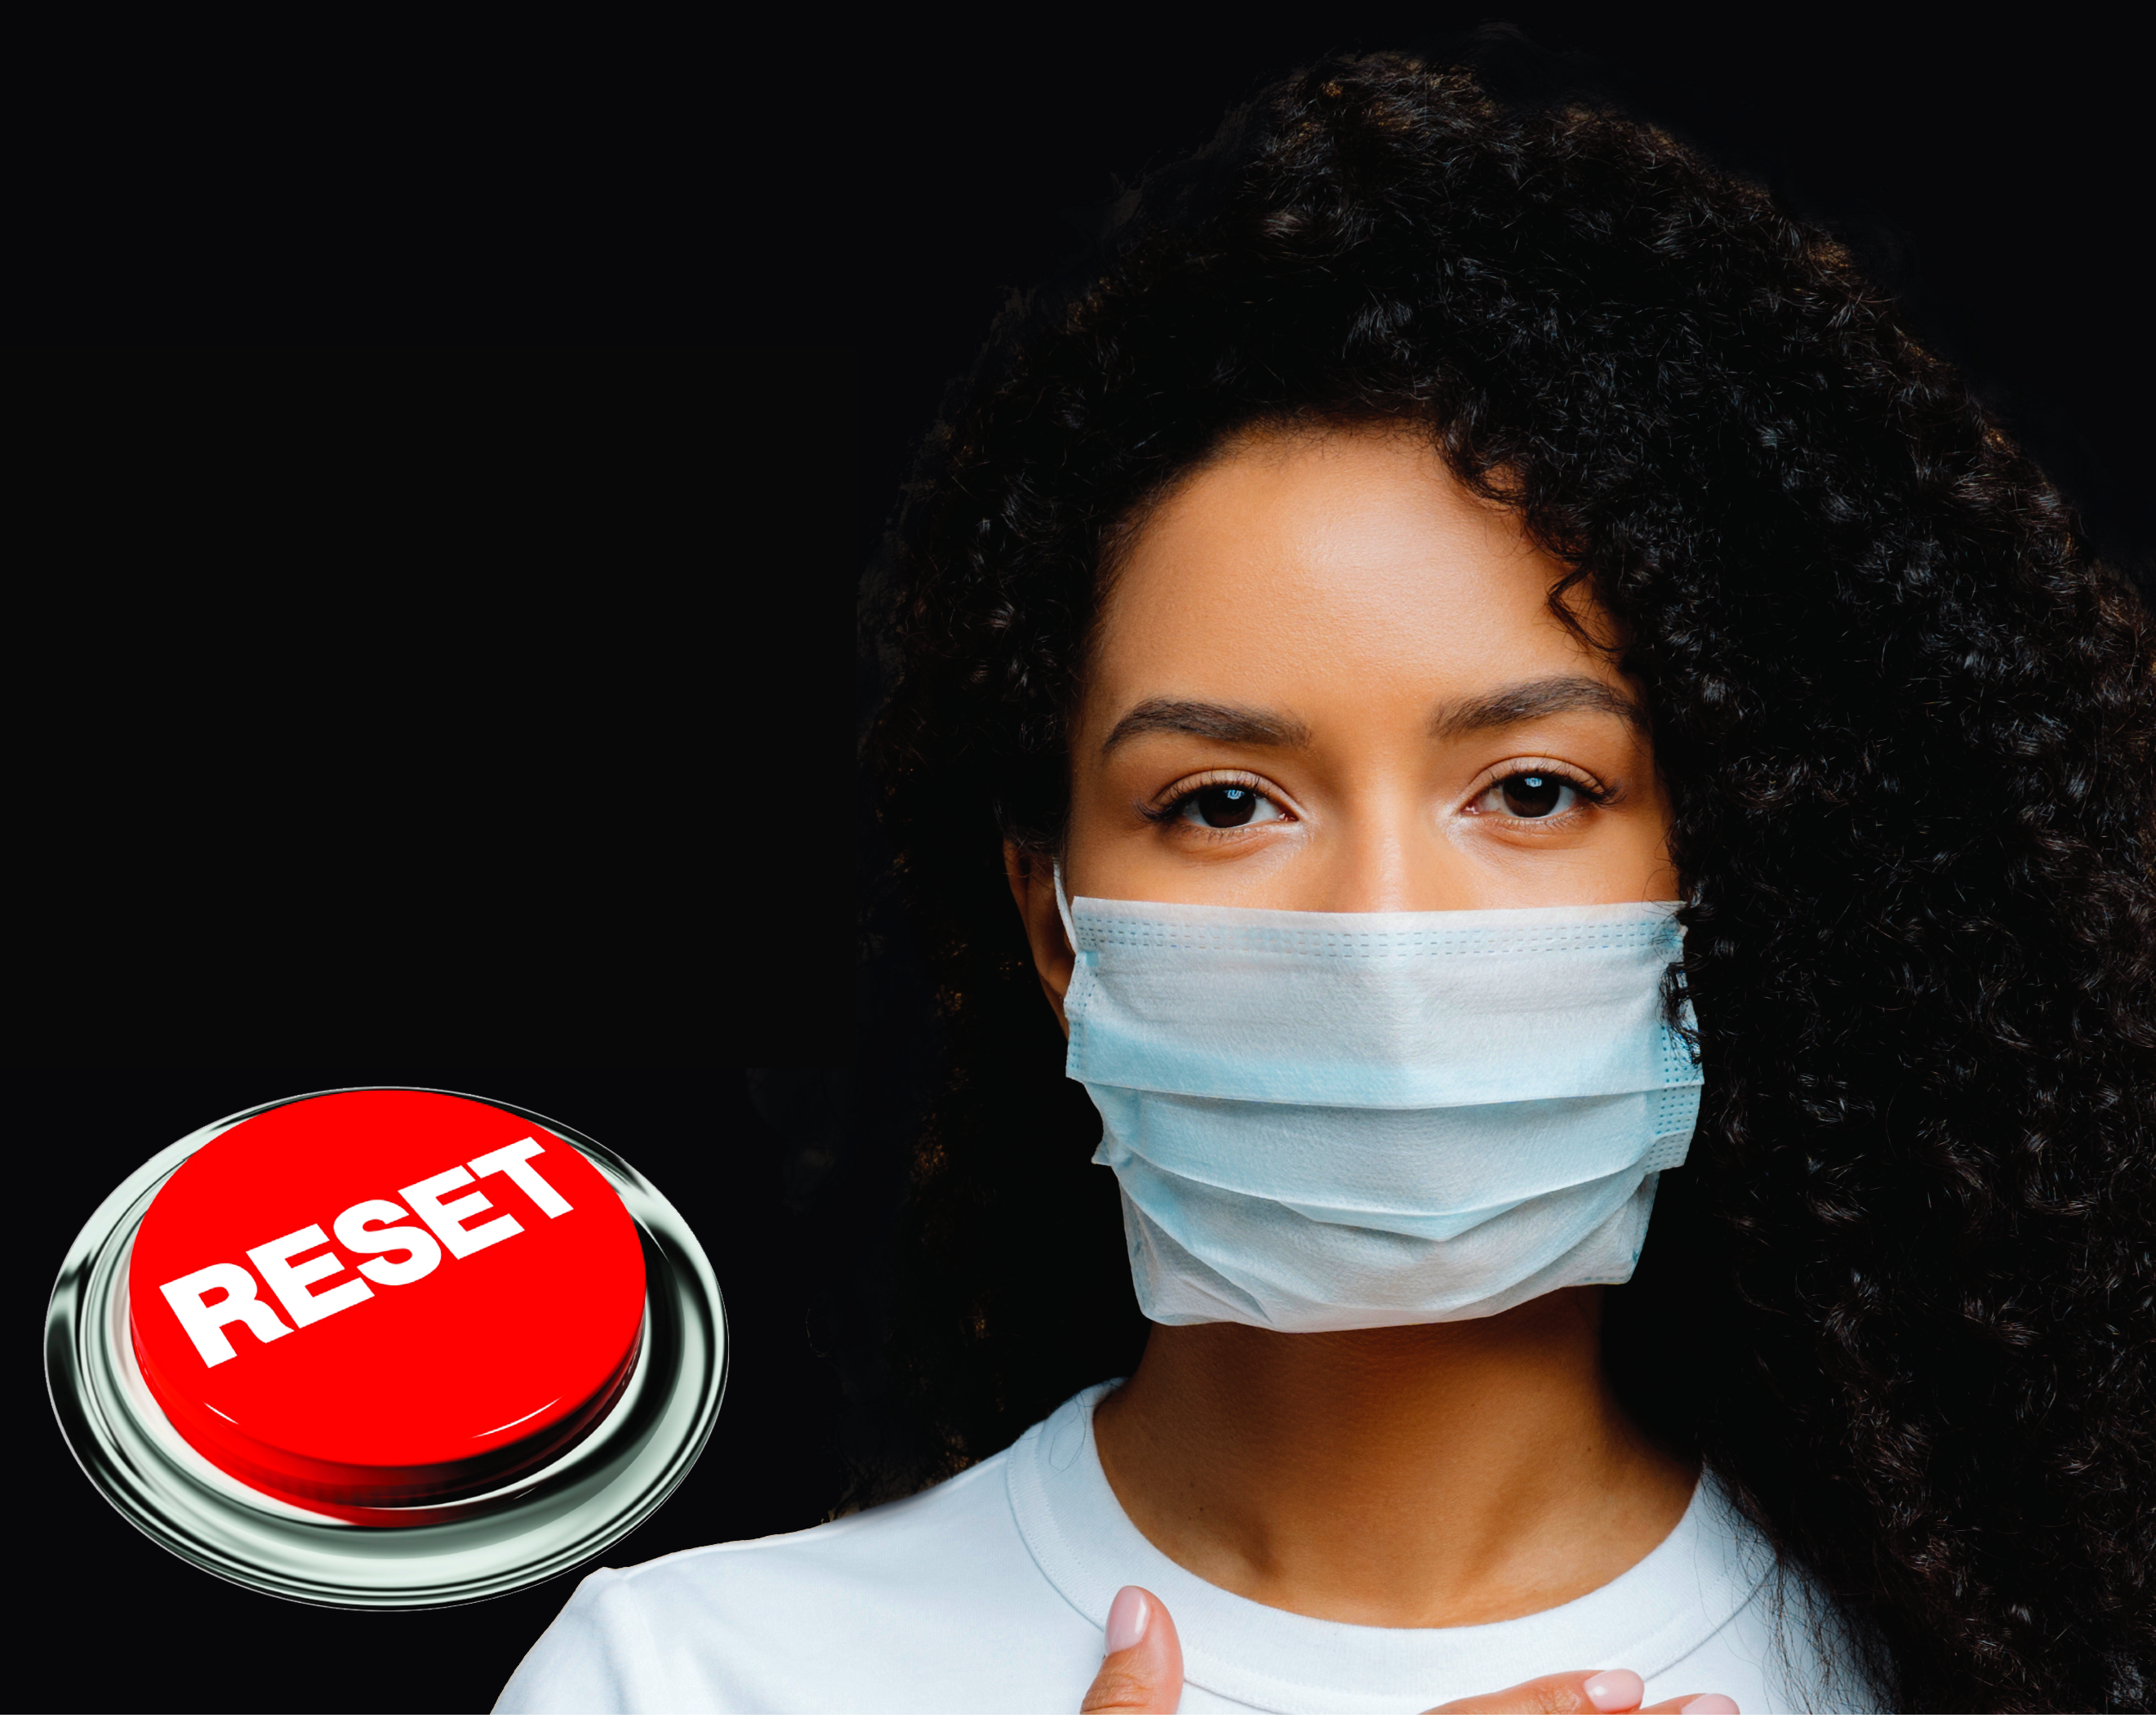 Young woman with surgical mask over her mouth and noise with a red "reset" button on her left.